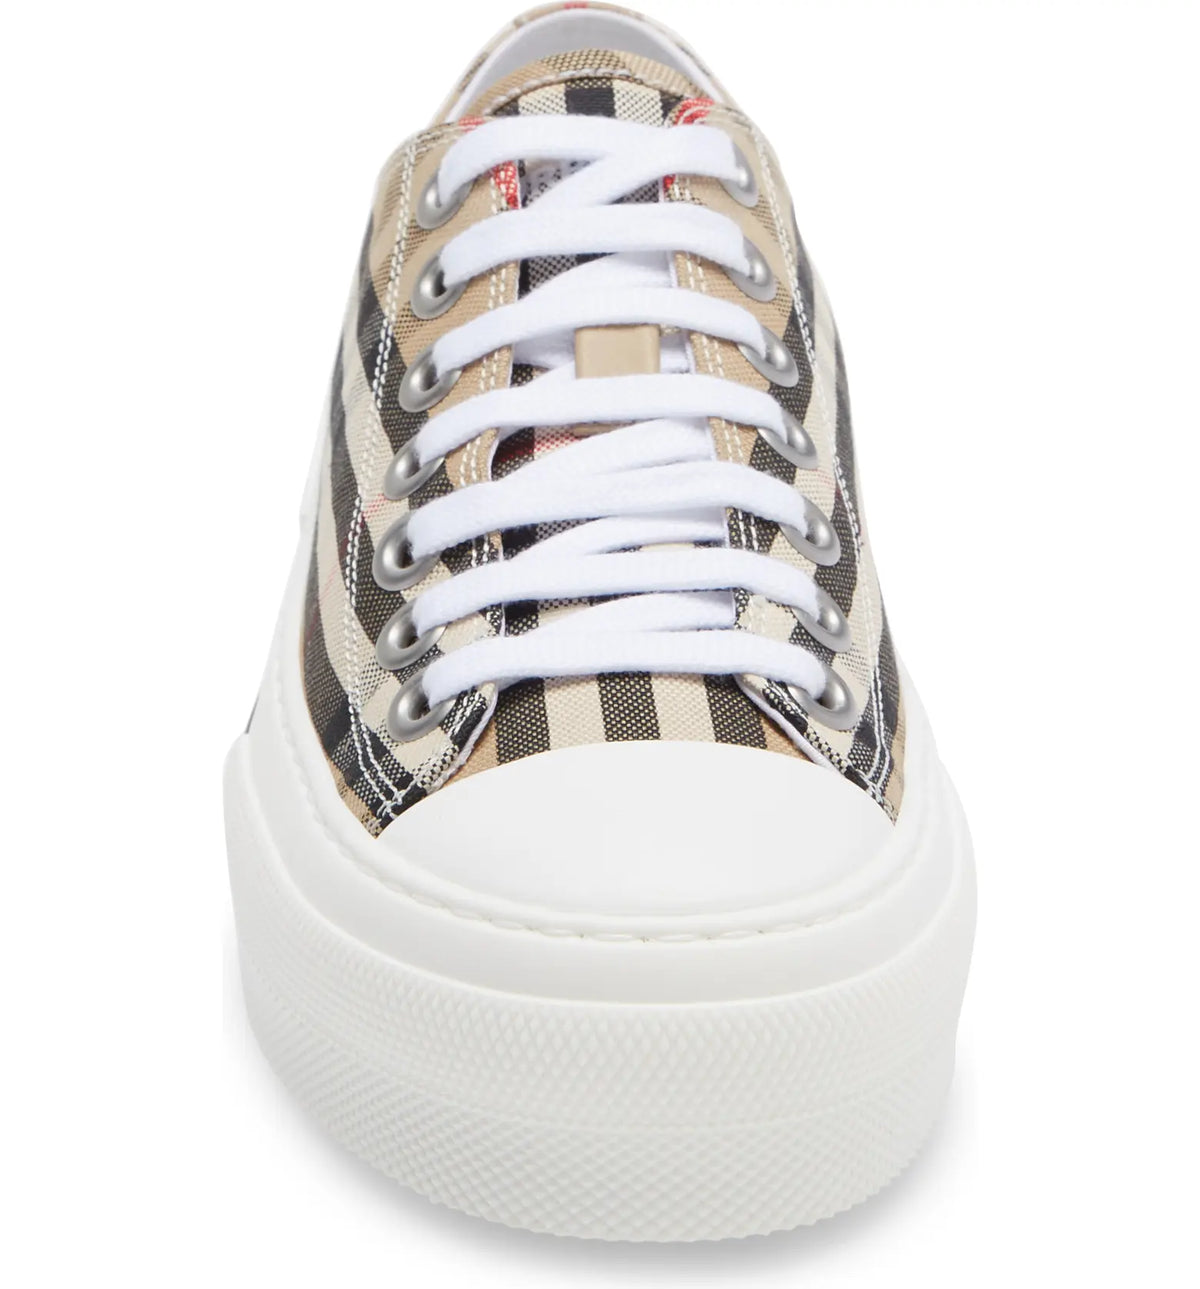 Burberry Multicolor Vintage Check Sneakers